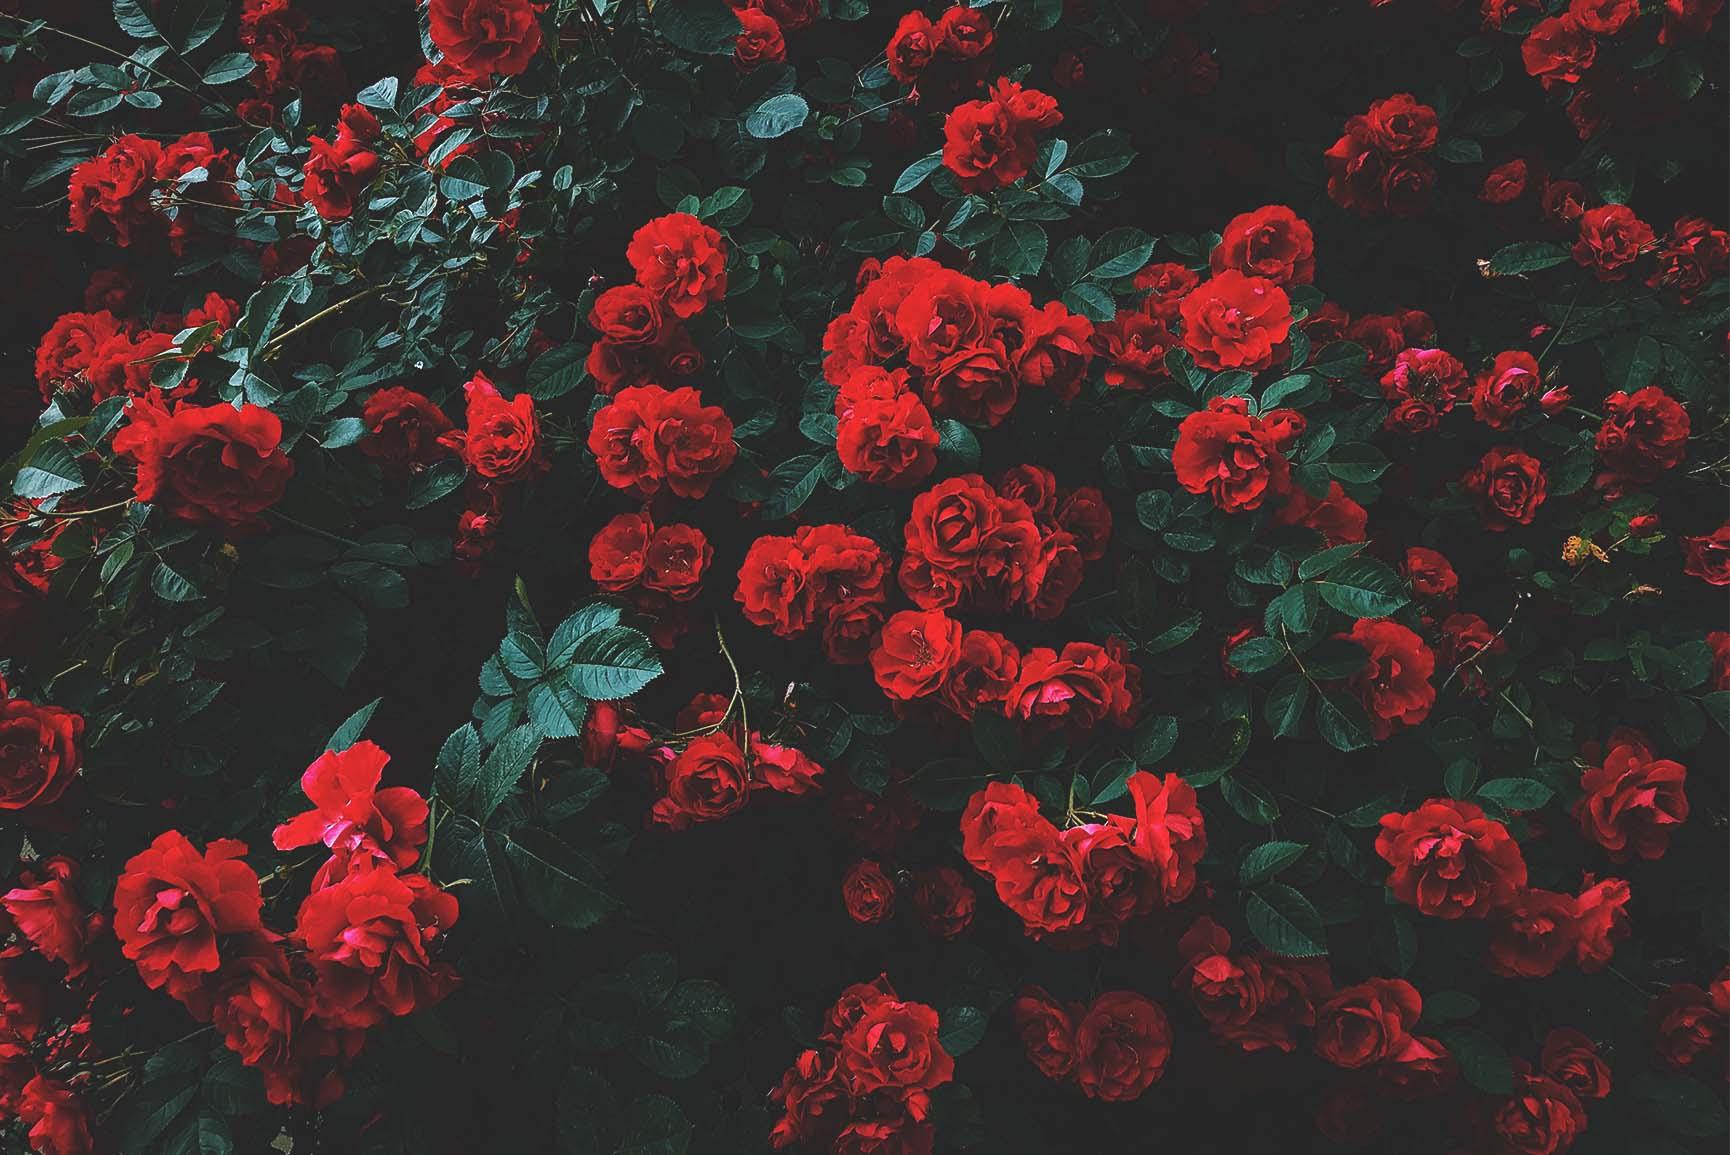 A Dozen Red Roses iPhone Wallpaper for Valentine's Day